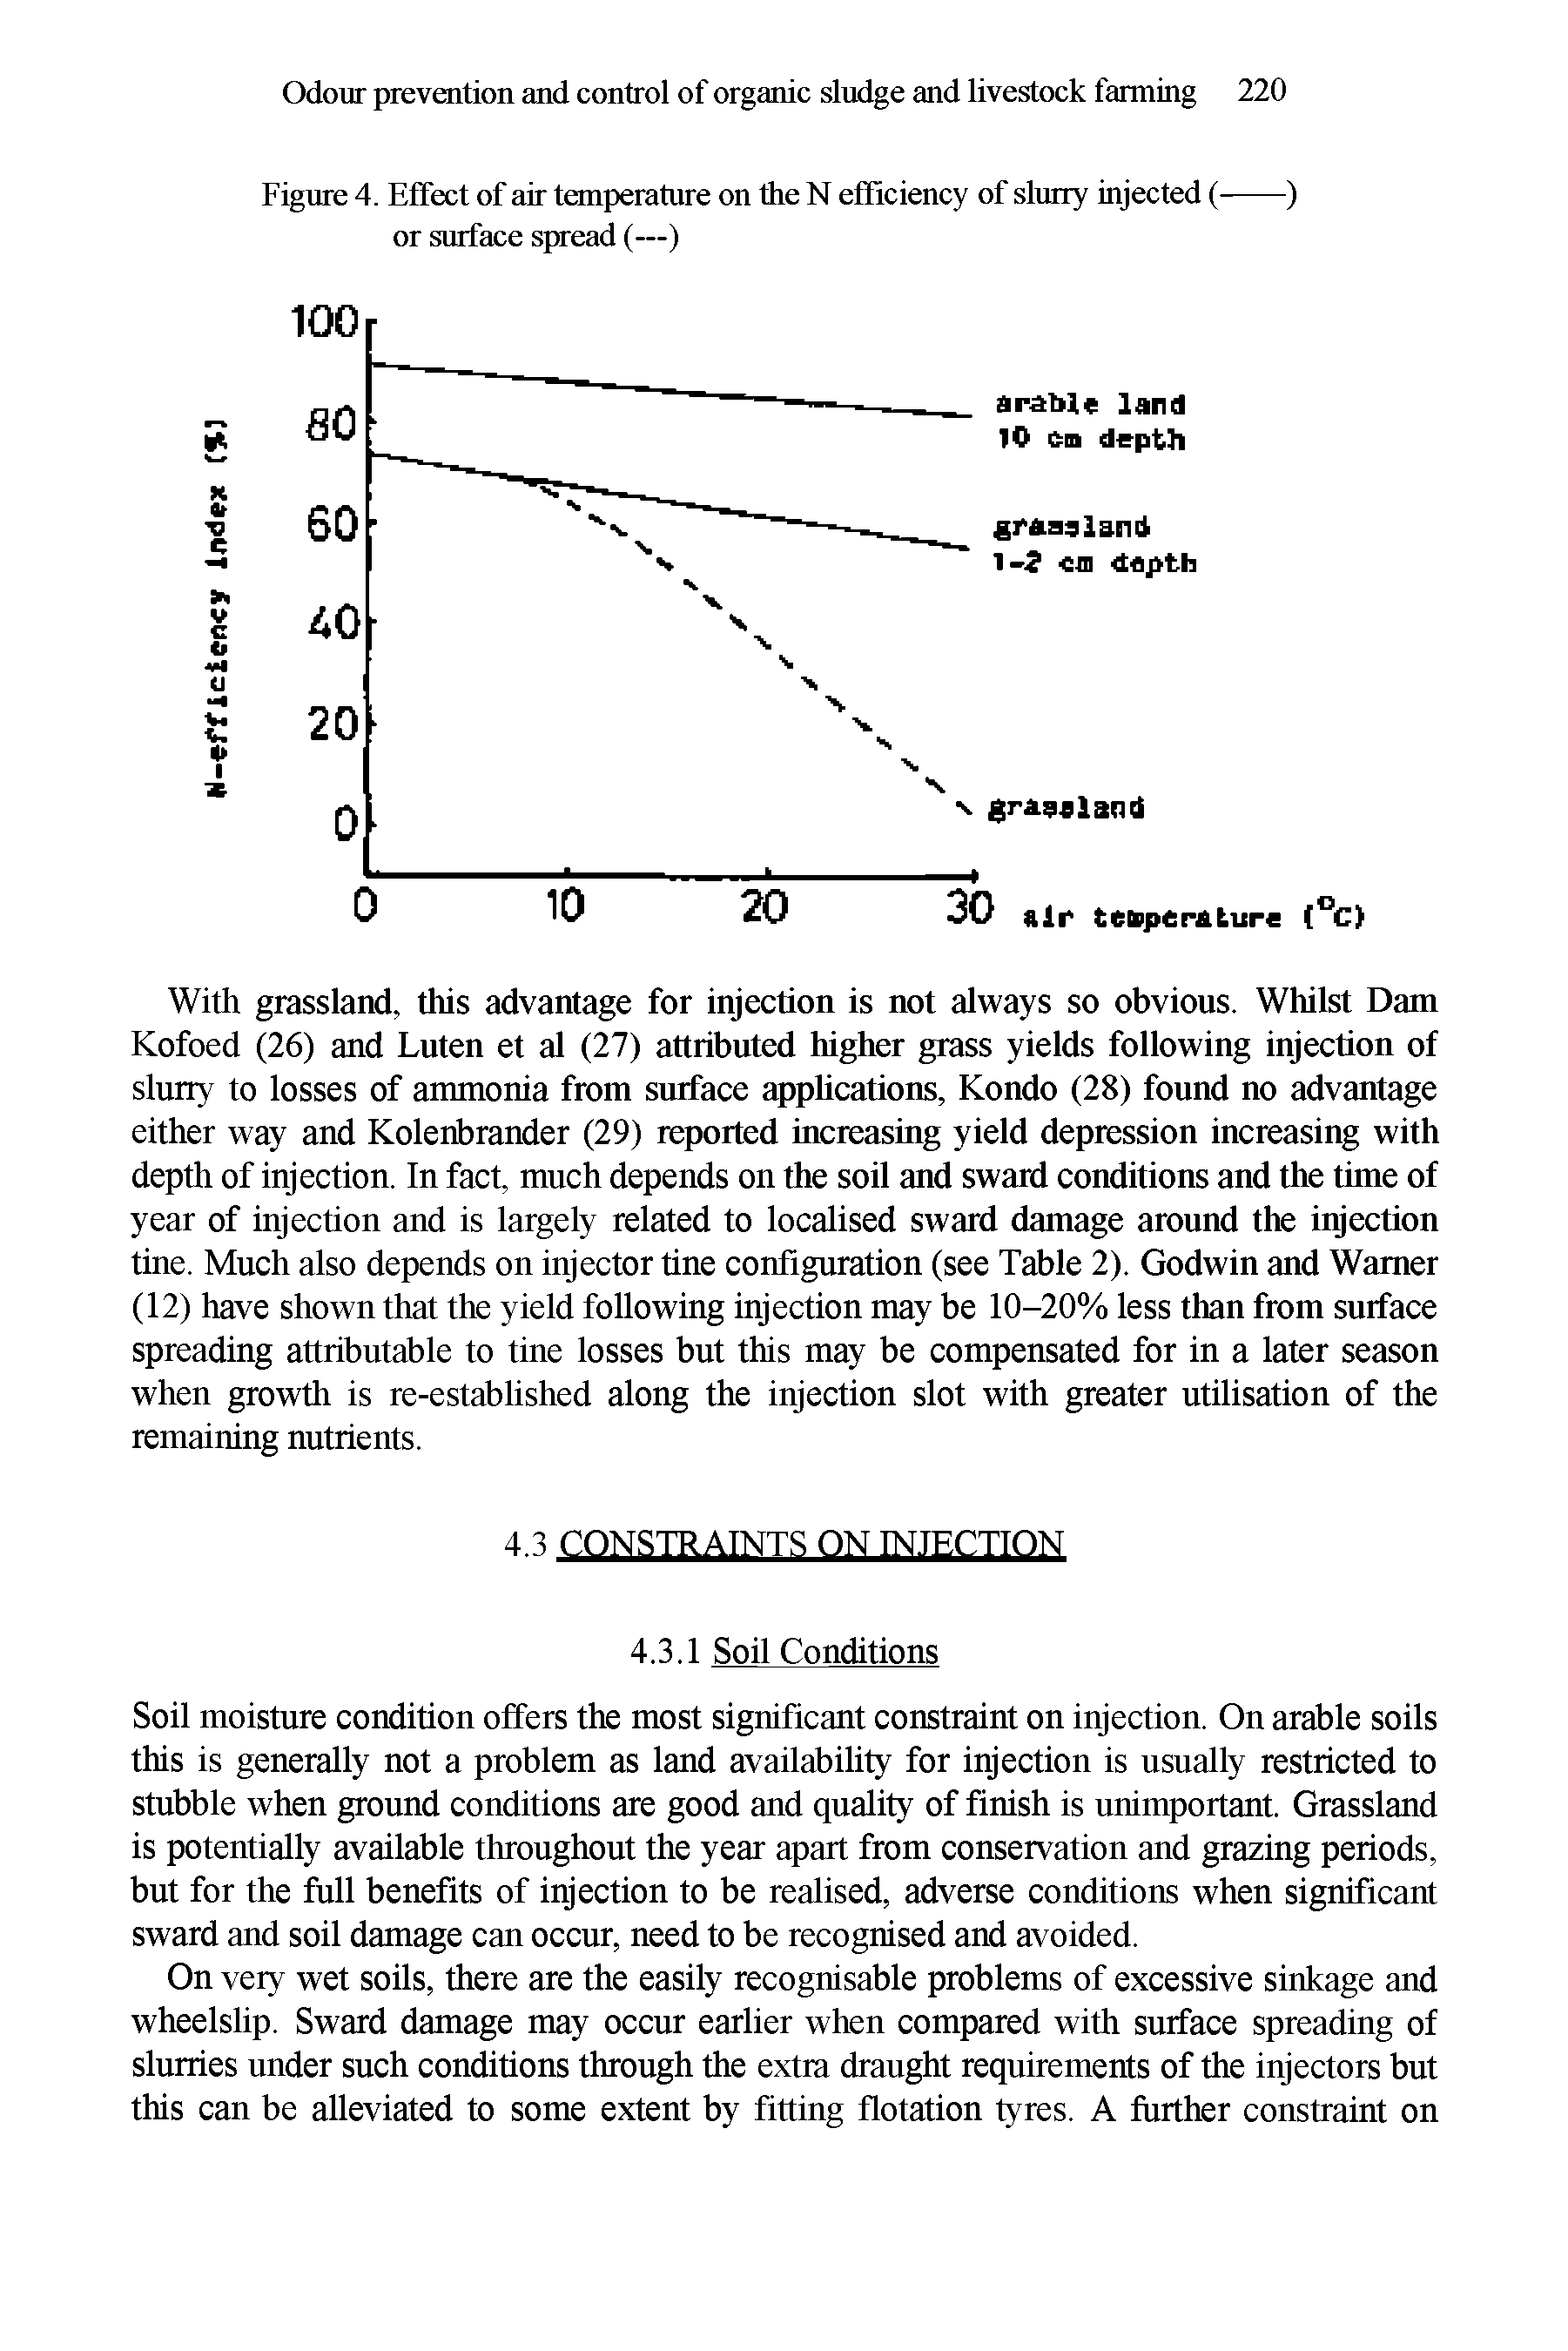 Figure 4. Effect of air temperature on the N efficiency of slurry injected (-)...